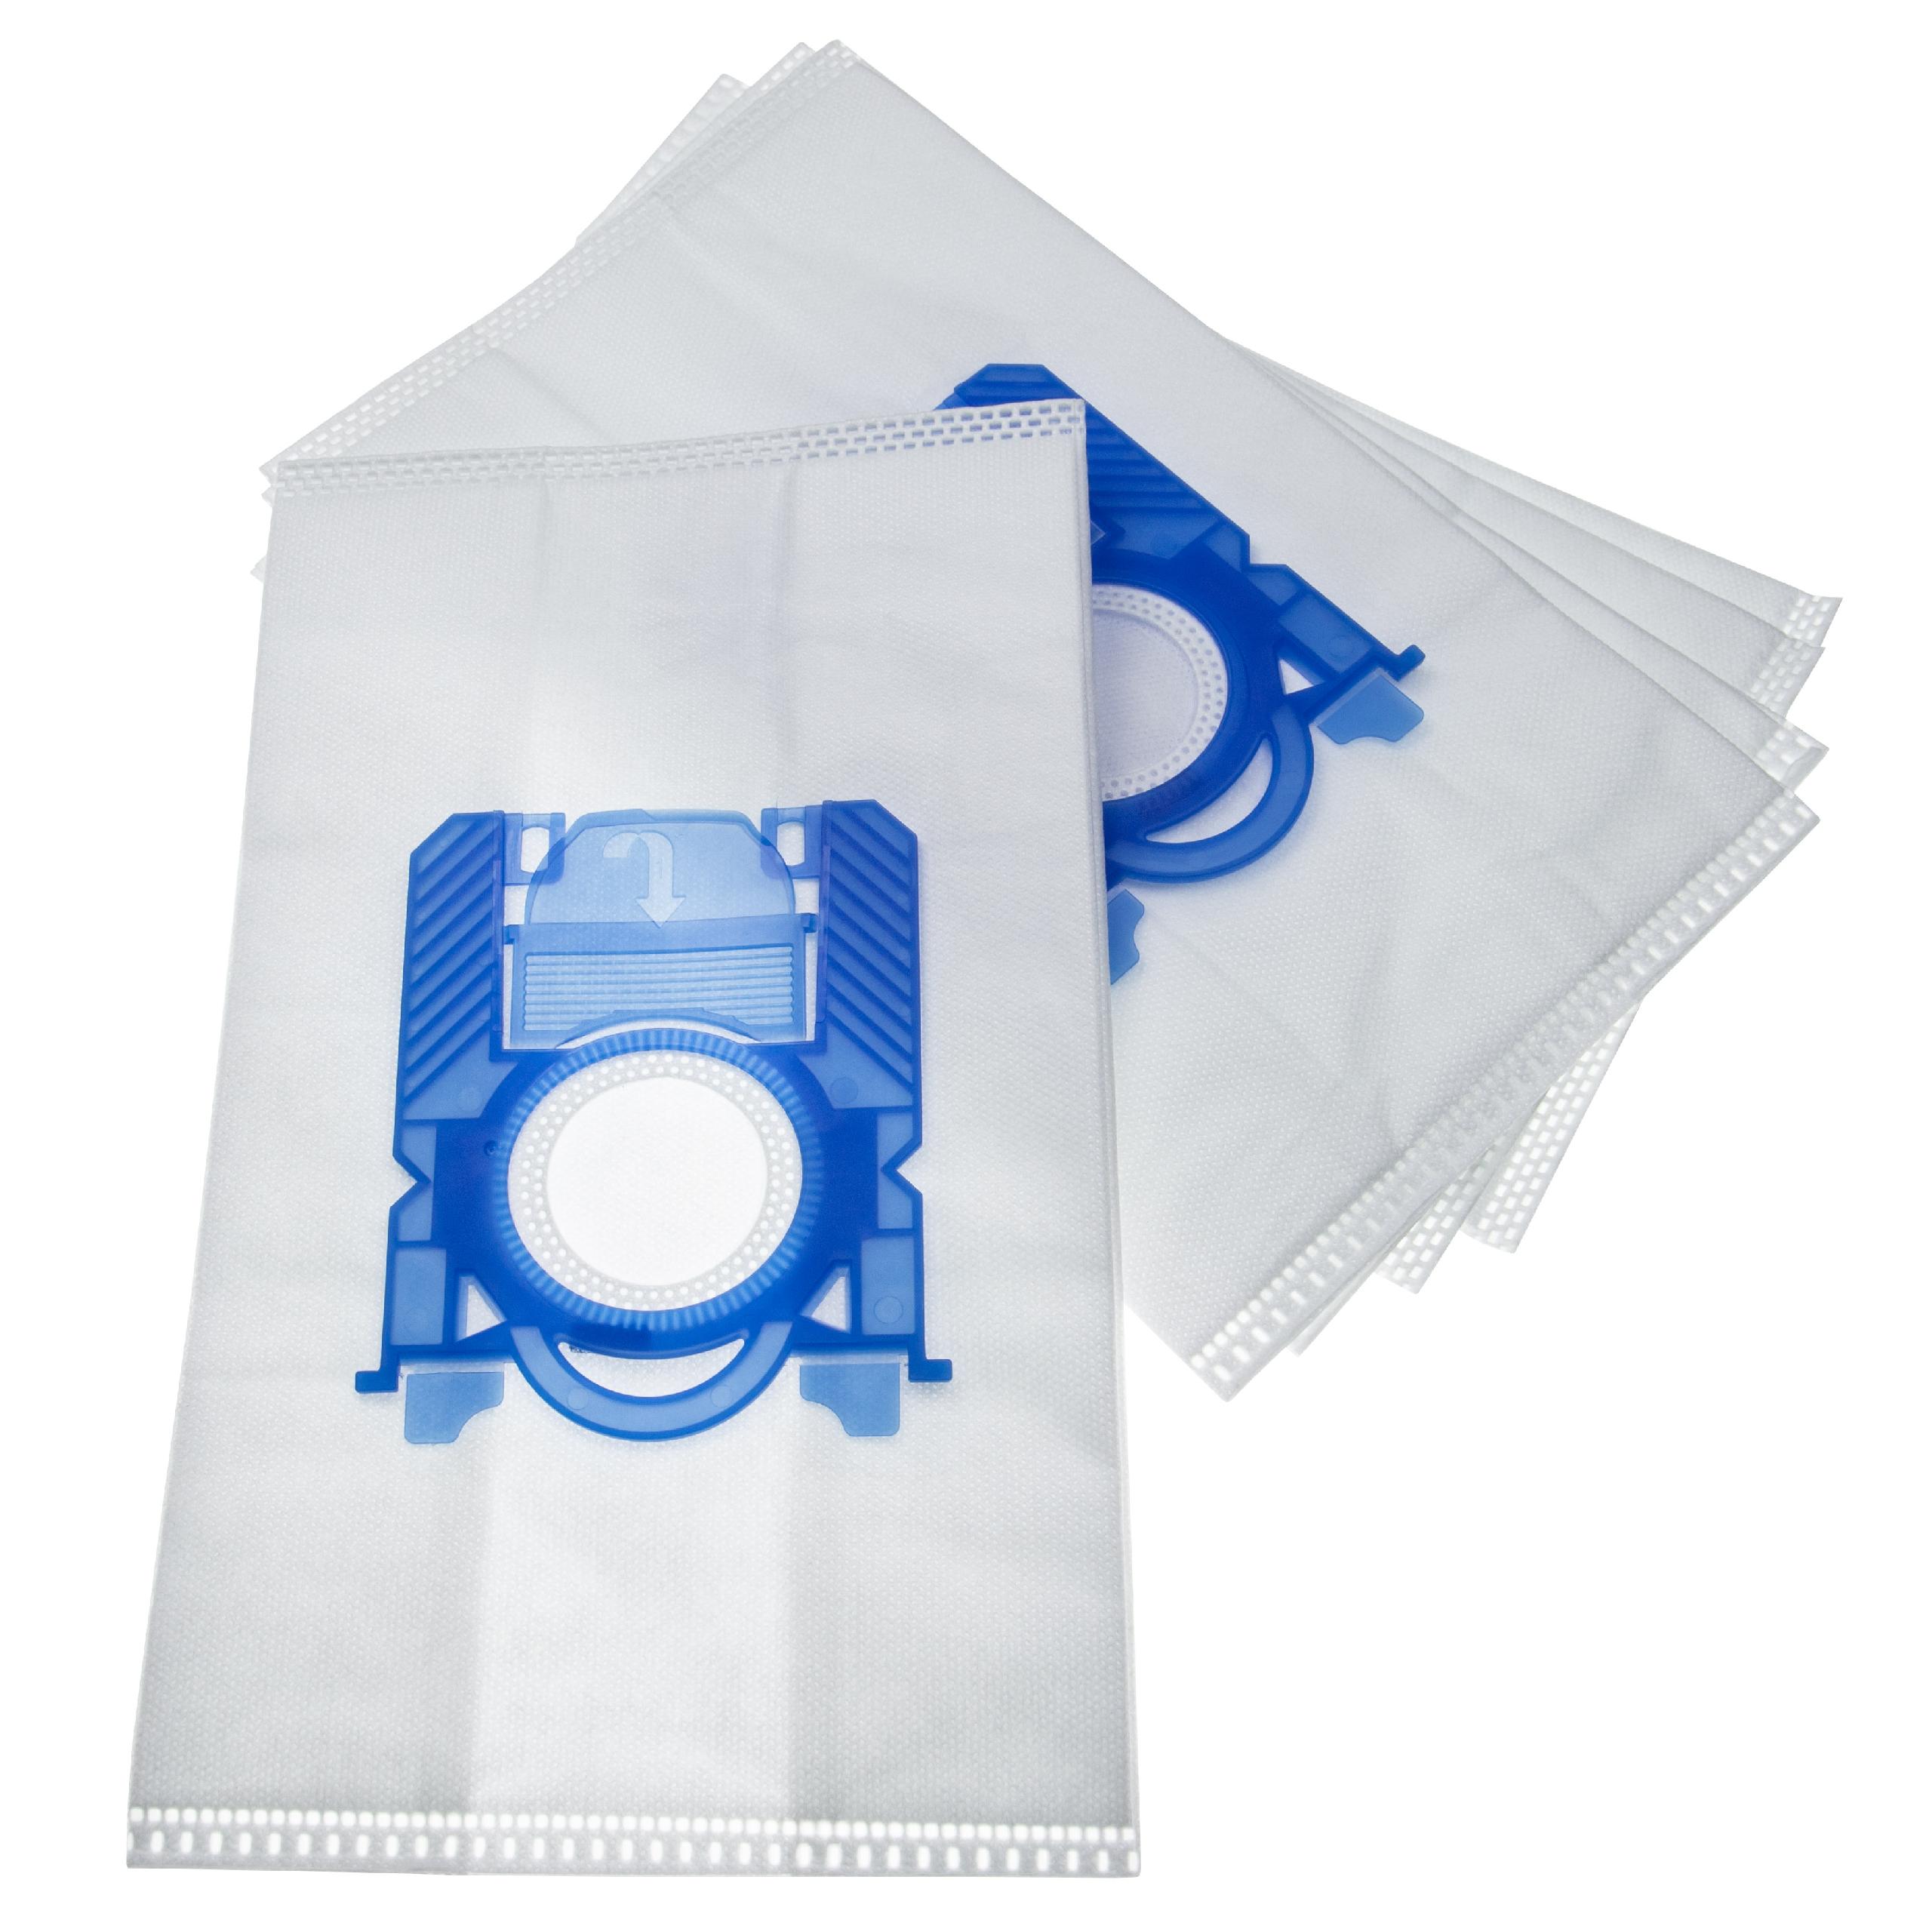 5x Vacuum Cleaner Bag replaces AEG 9001684753, GR203S, 900166039/9 for Philips - microfleece